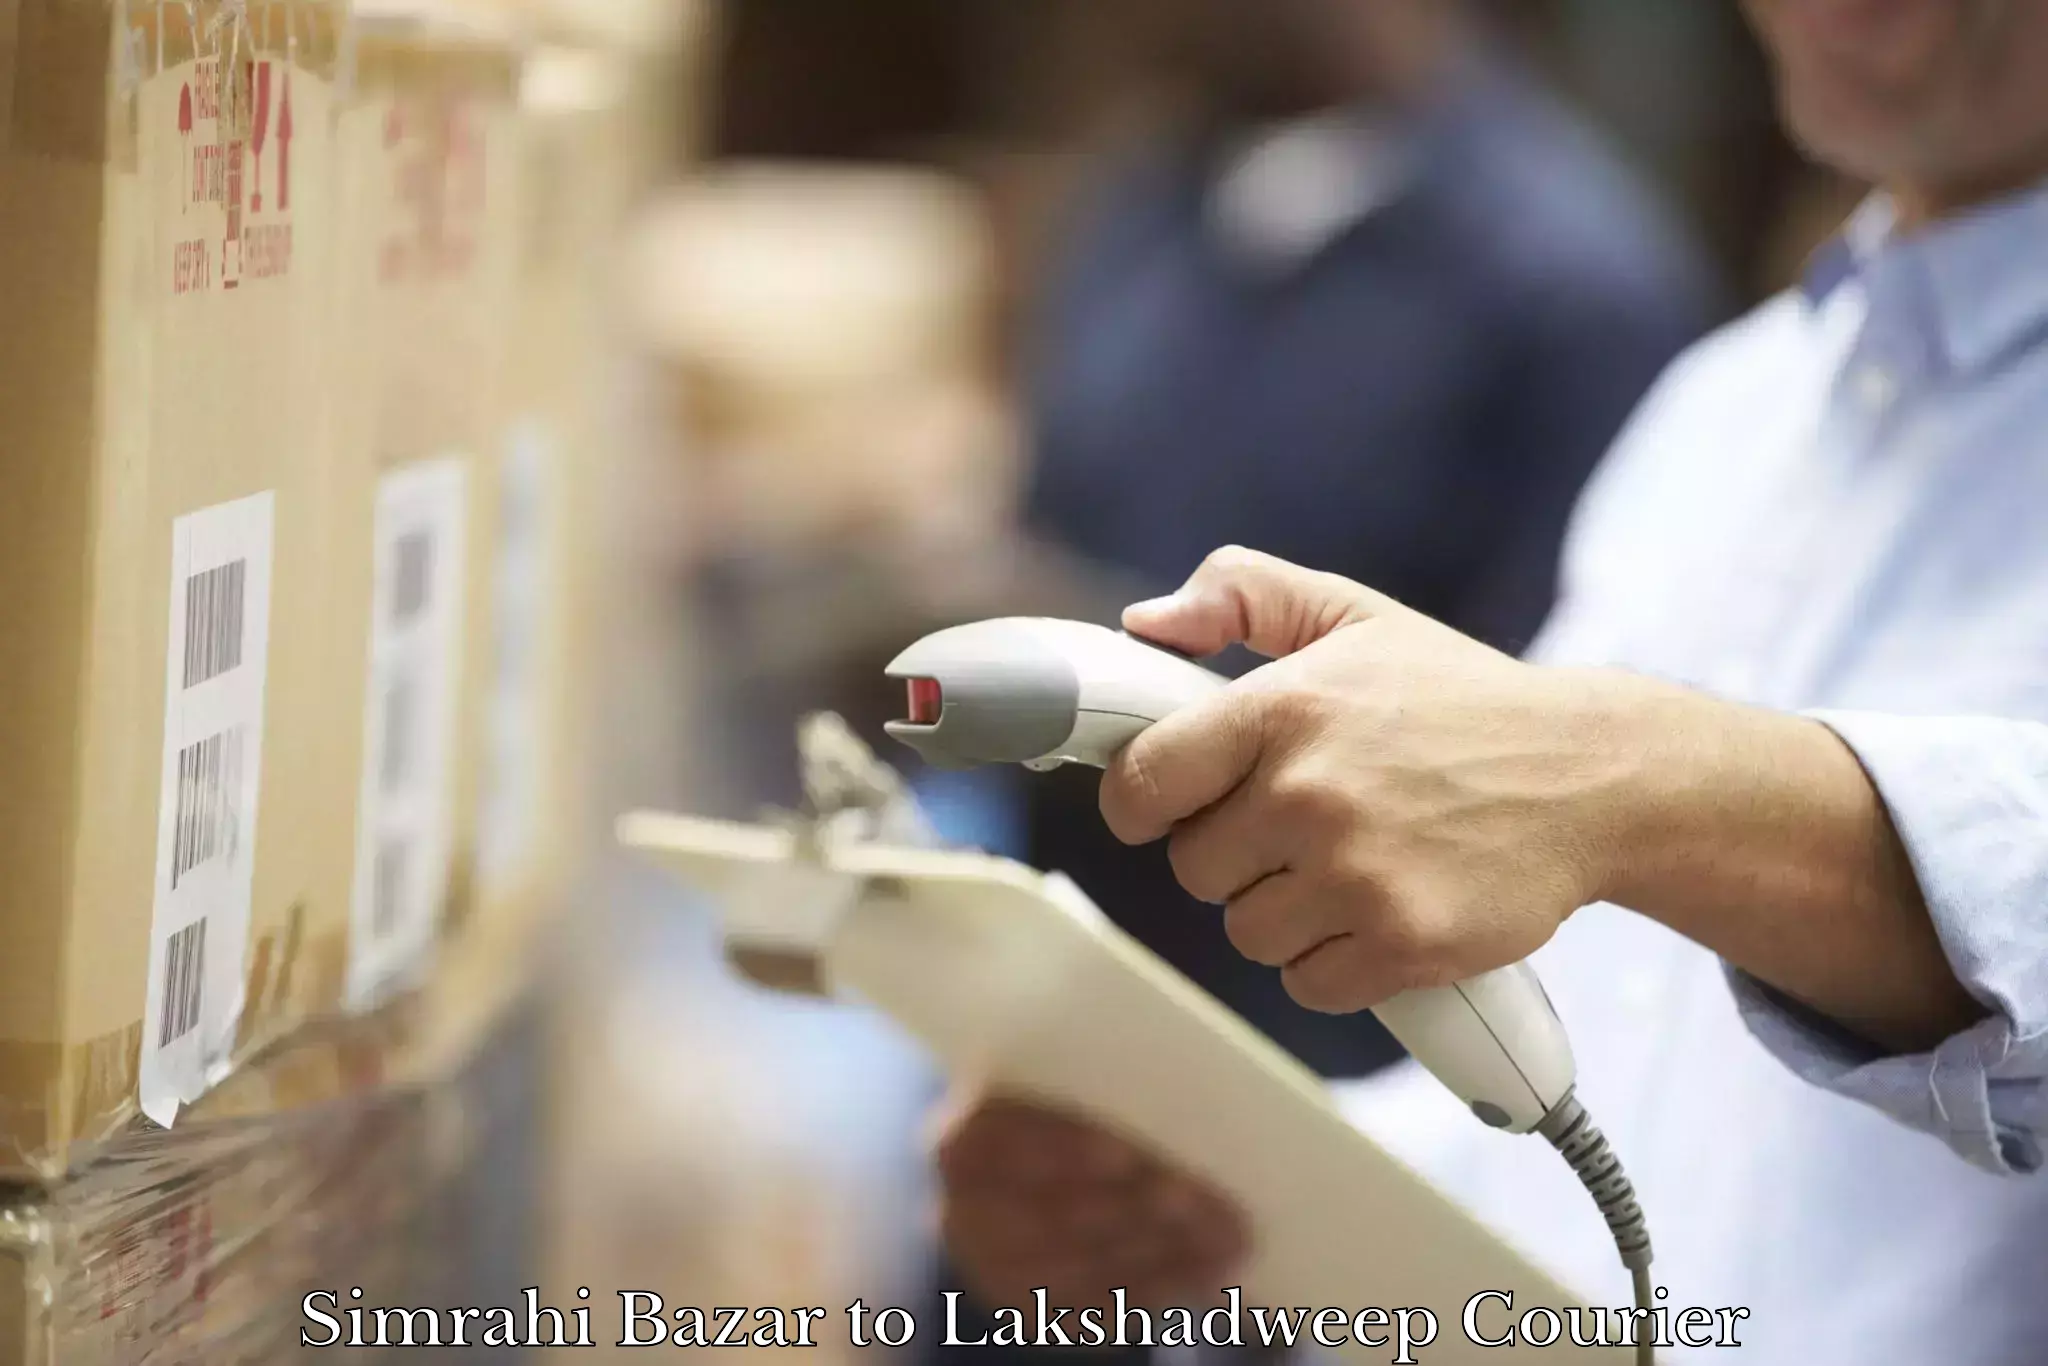 24-hour courier services in Simrahi Bazar to Lakshadweep